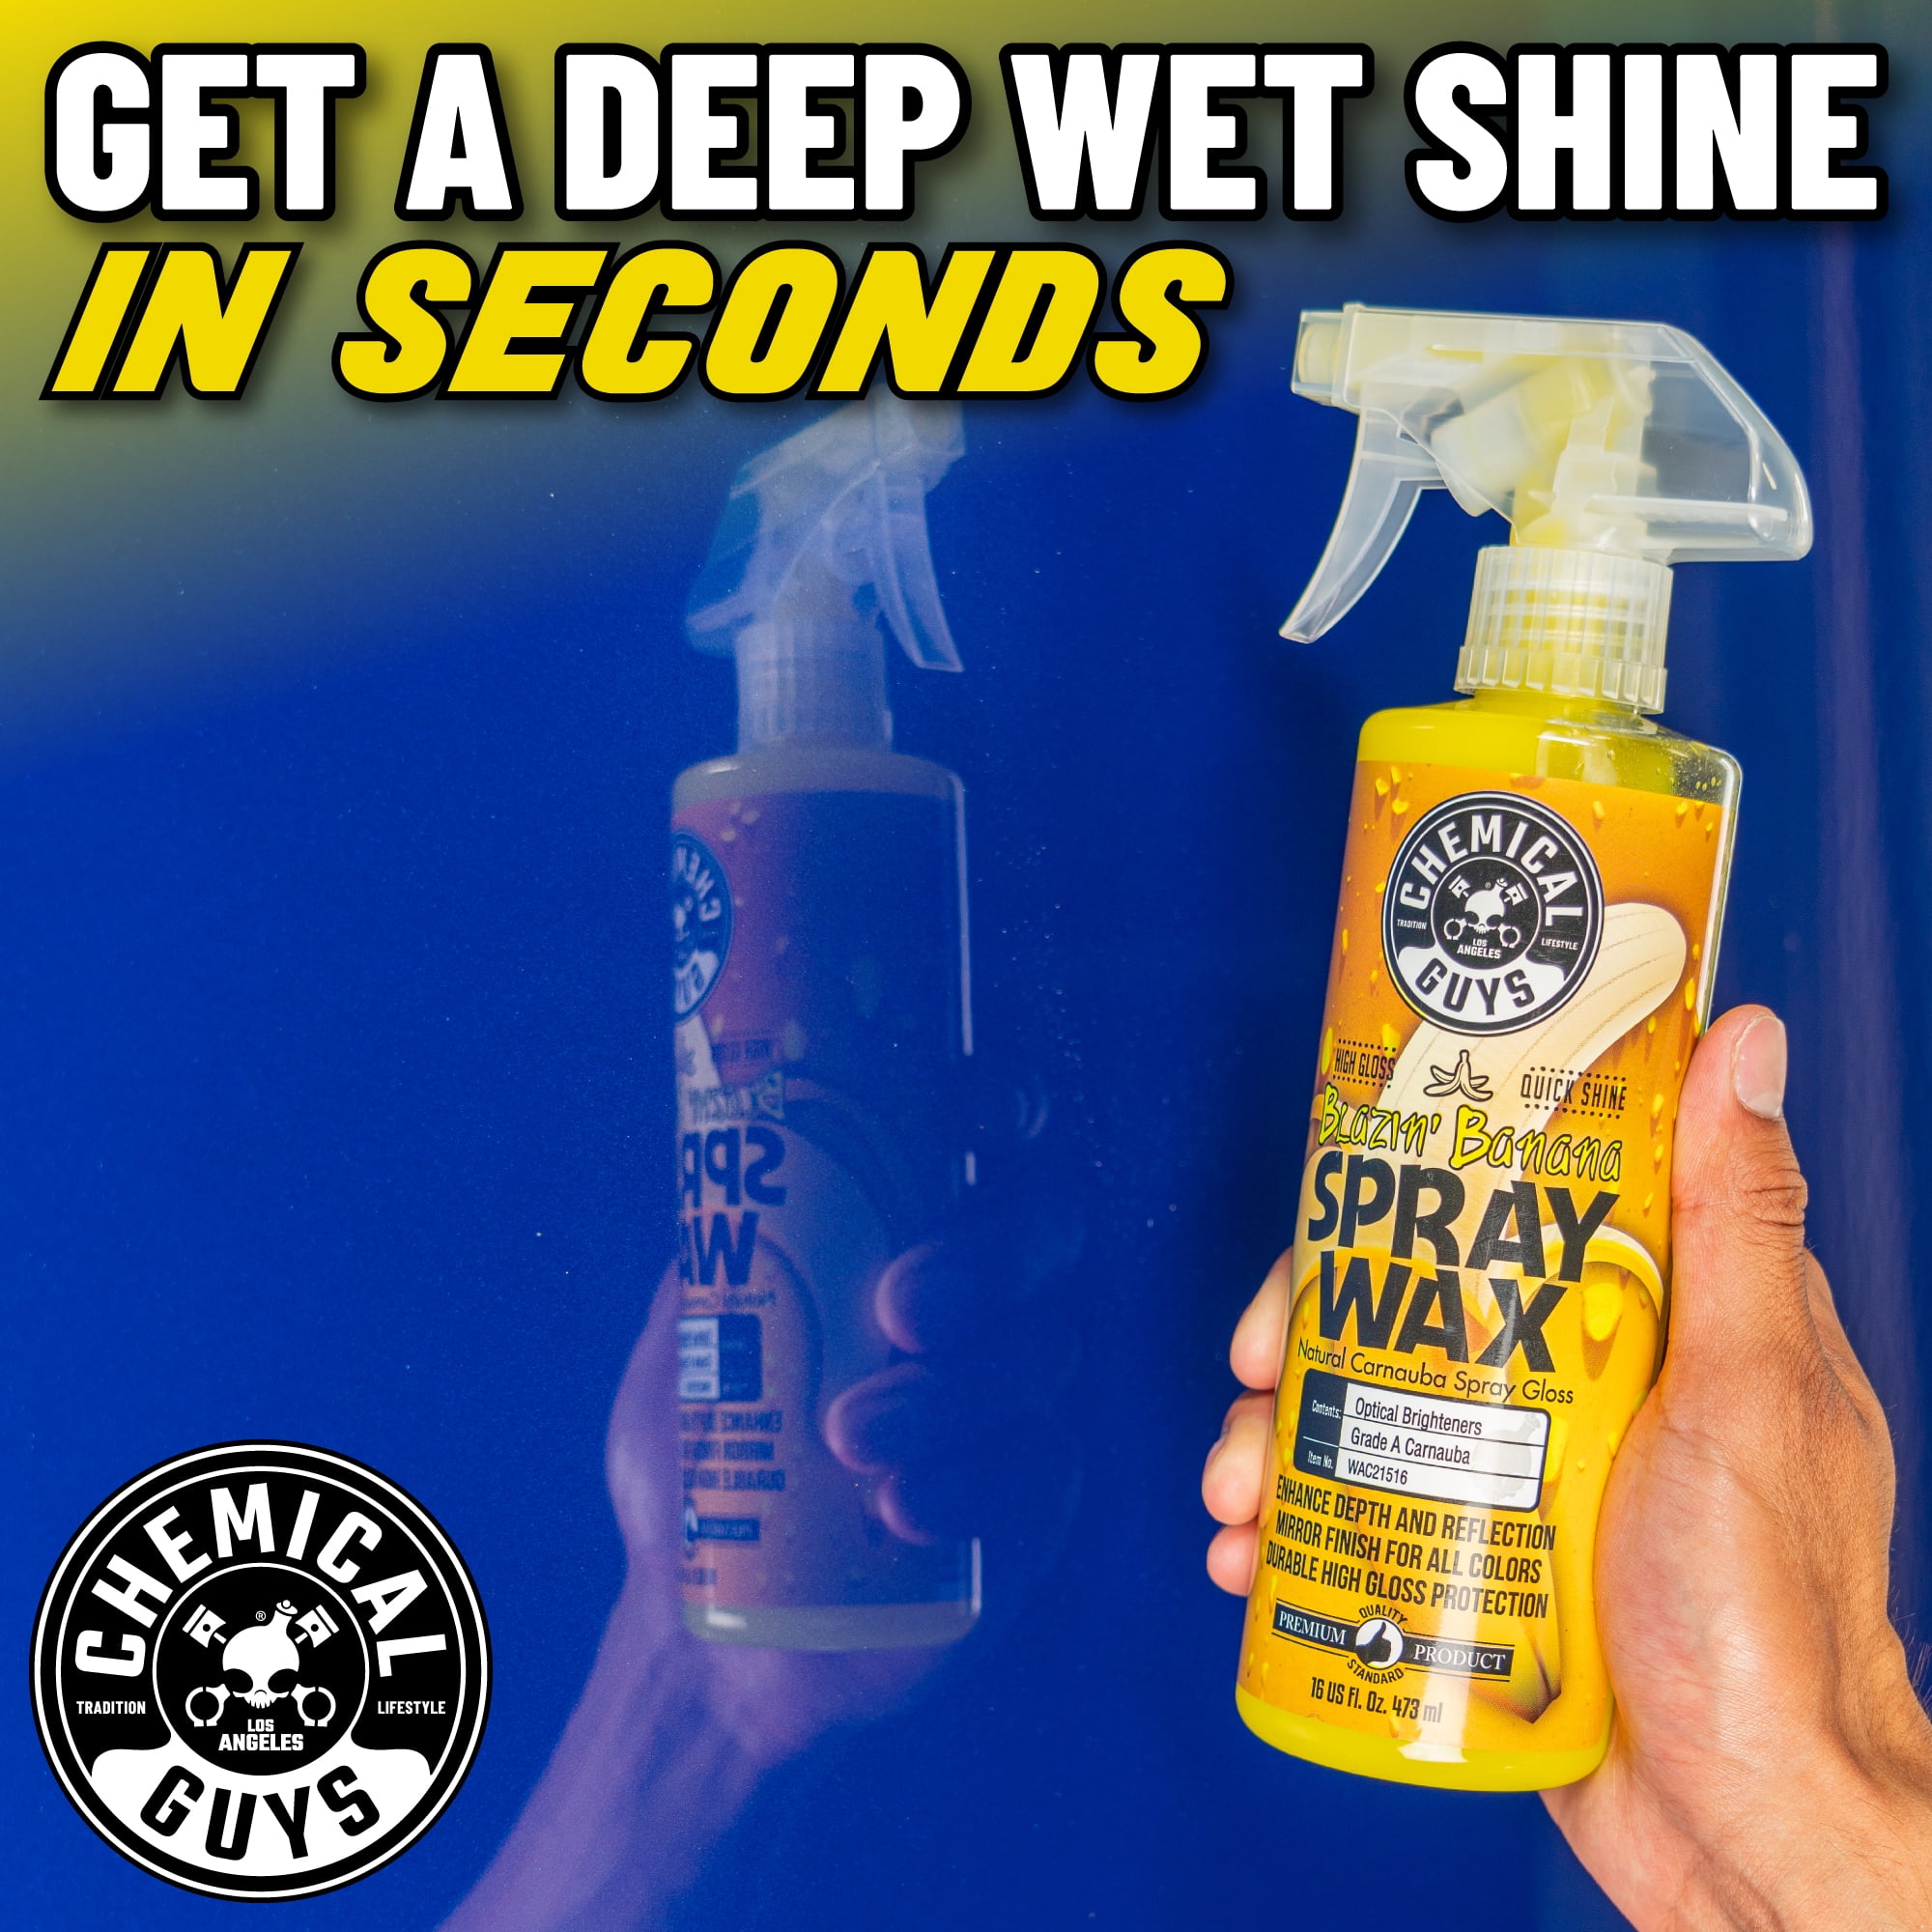 Chemical Guys Blazin' Banana Spray Wax Review with Real RESULTS!! (It  works) 